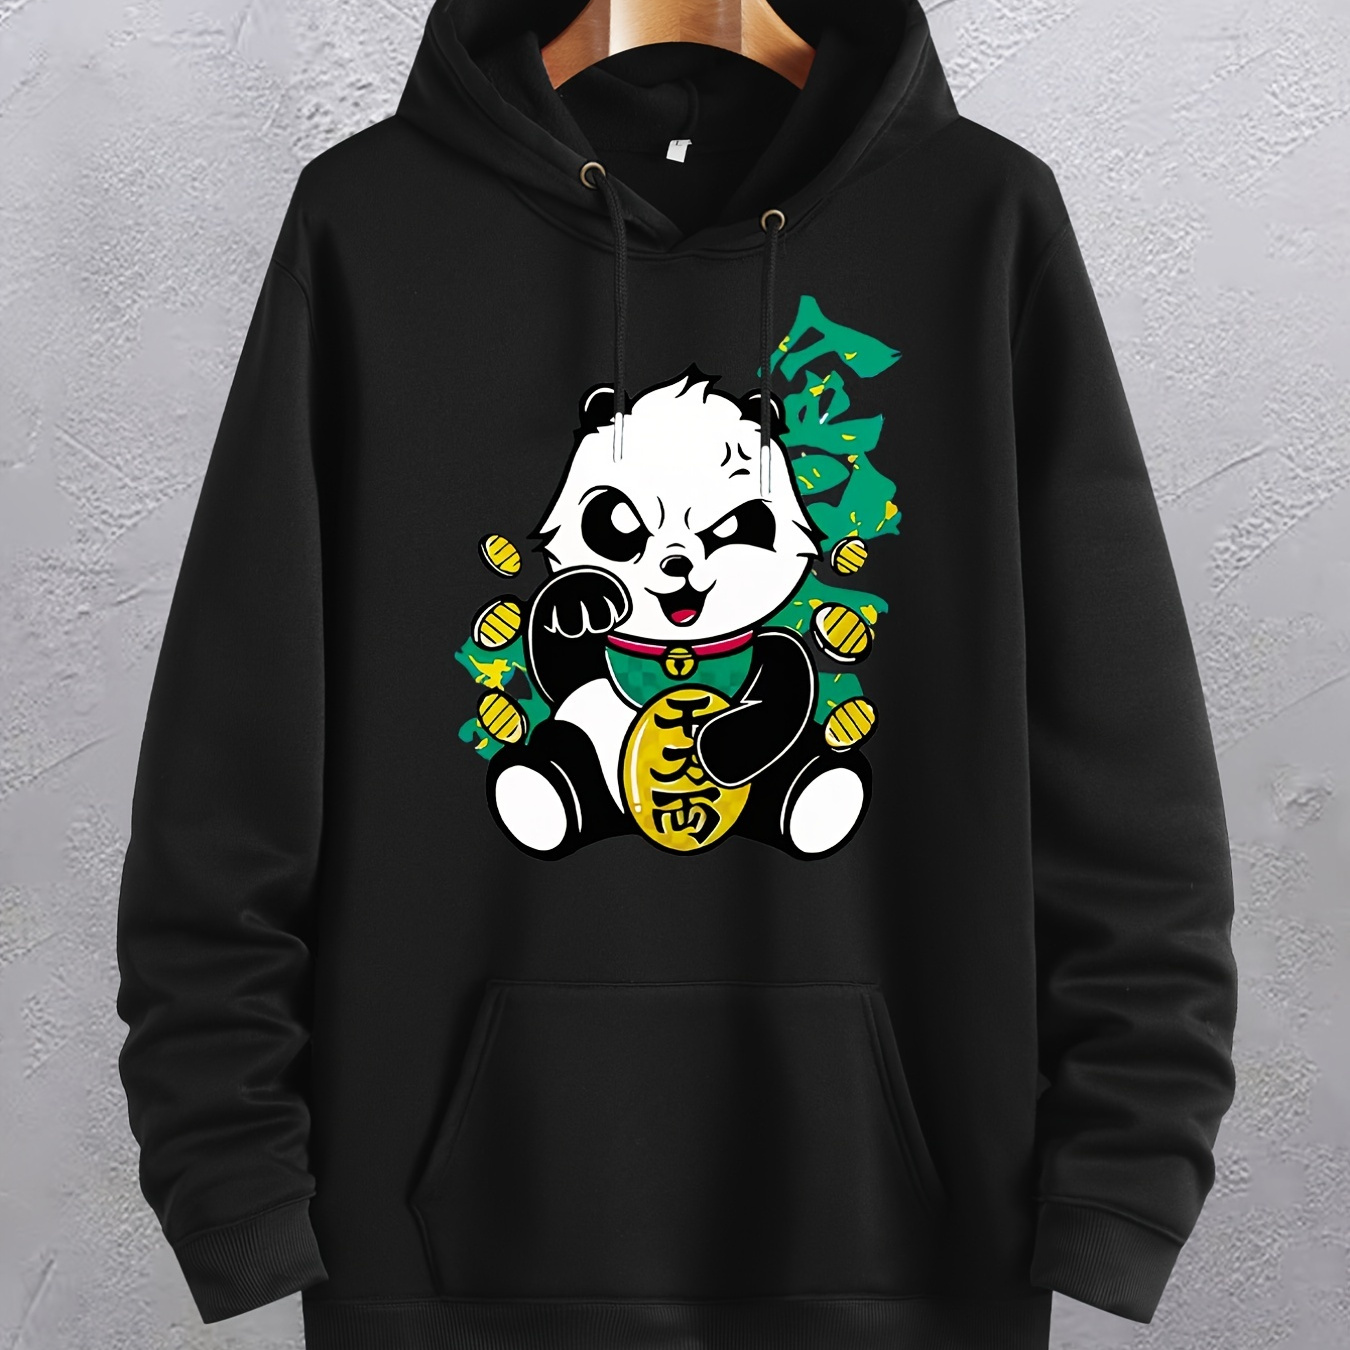 

Men's Plus Size Cartoon Panda Print Warm Fleece Hoodie Oversized Plain Color Drawstring Pocket Hooded Sweatshirt Thick Thermal Tops For Spring Autumn Winter, Loose Clothing For Big And Tall Guys